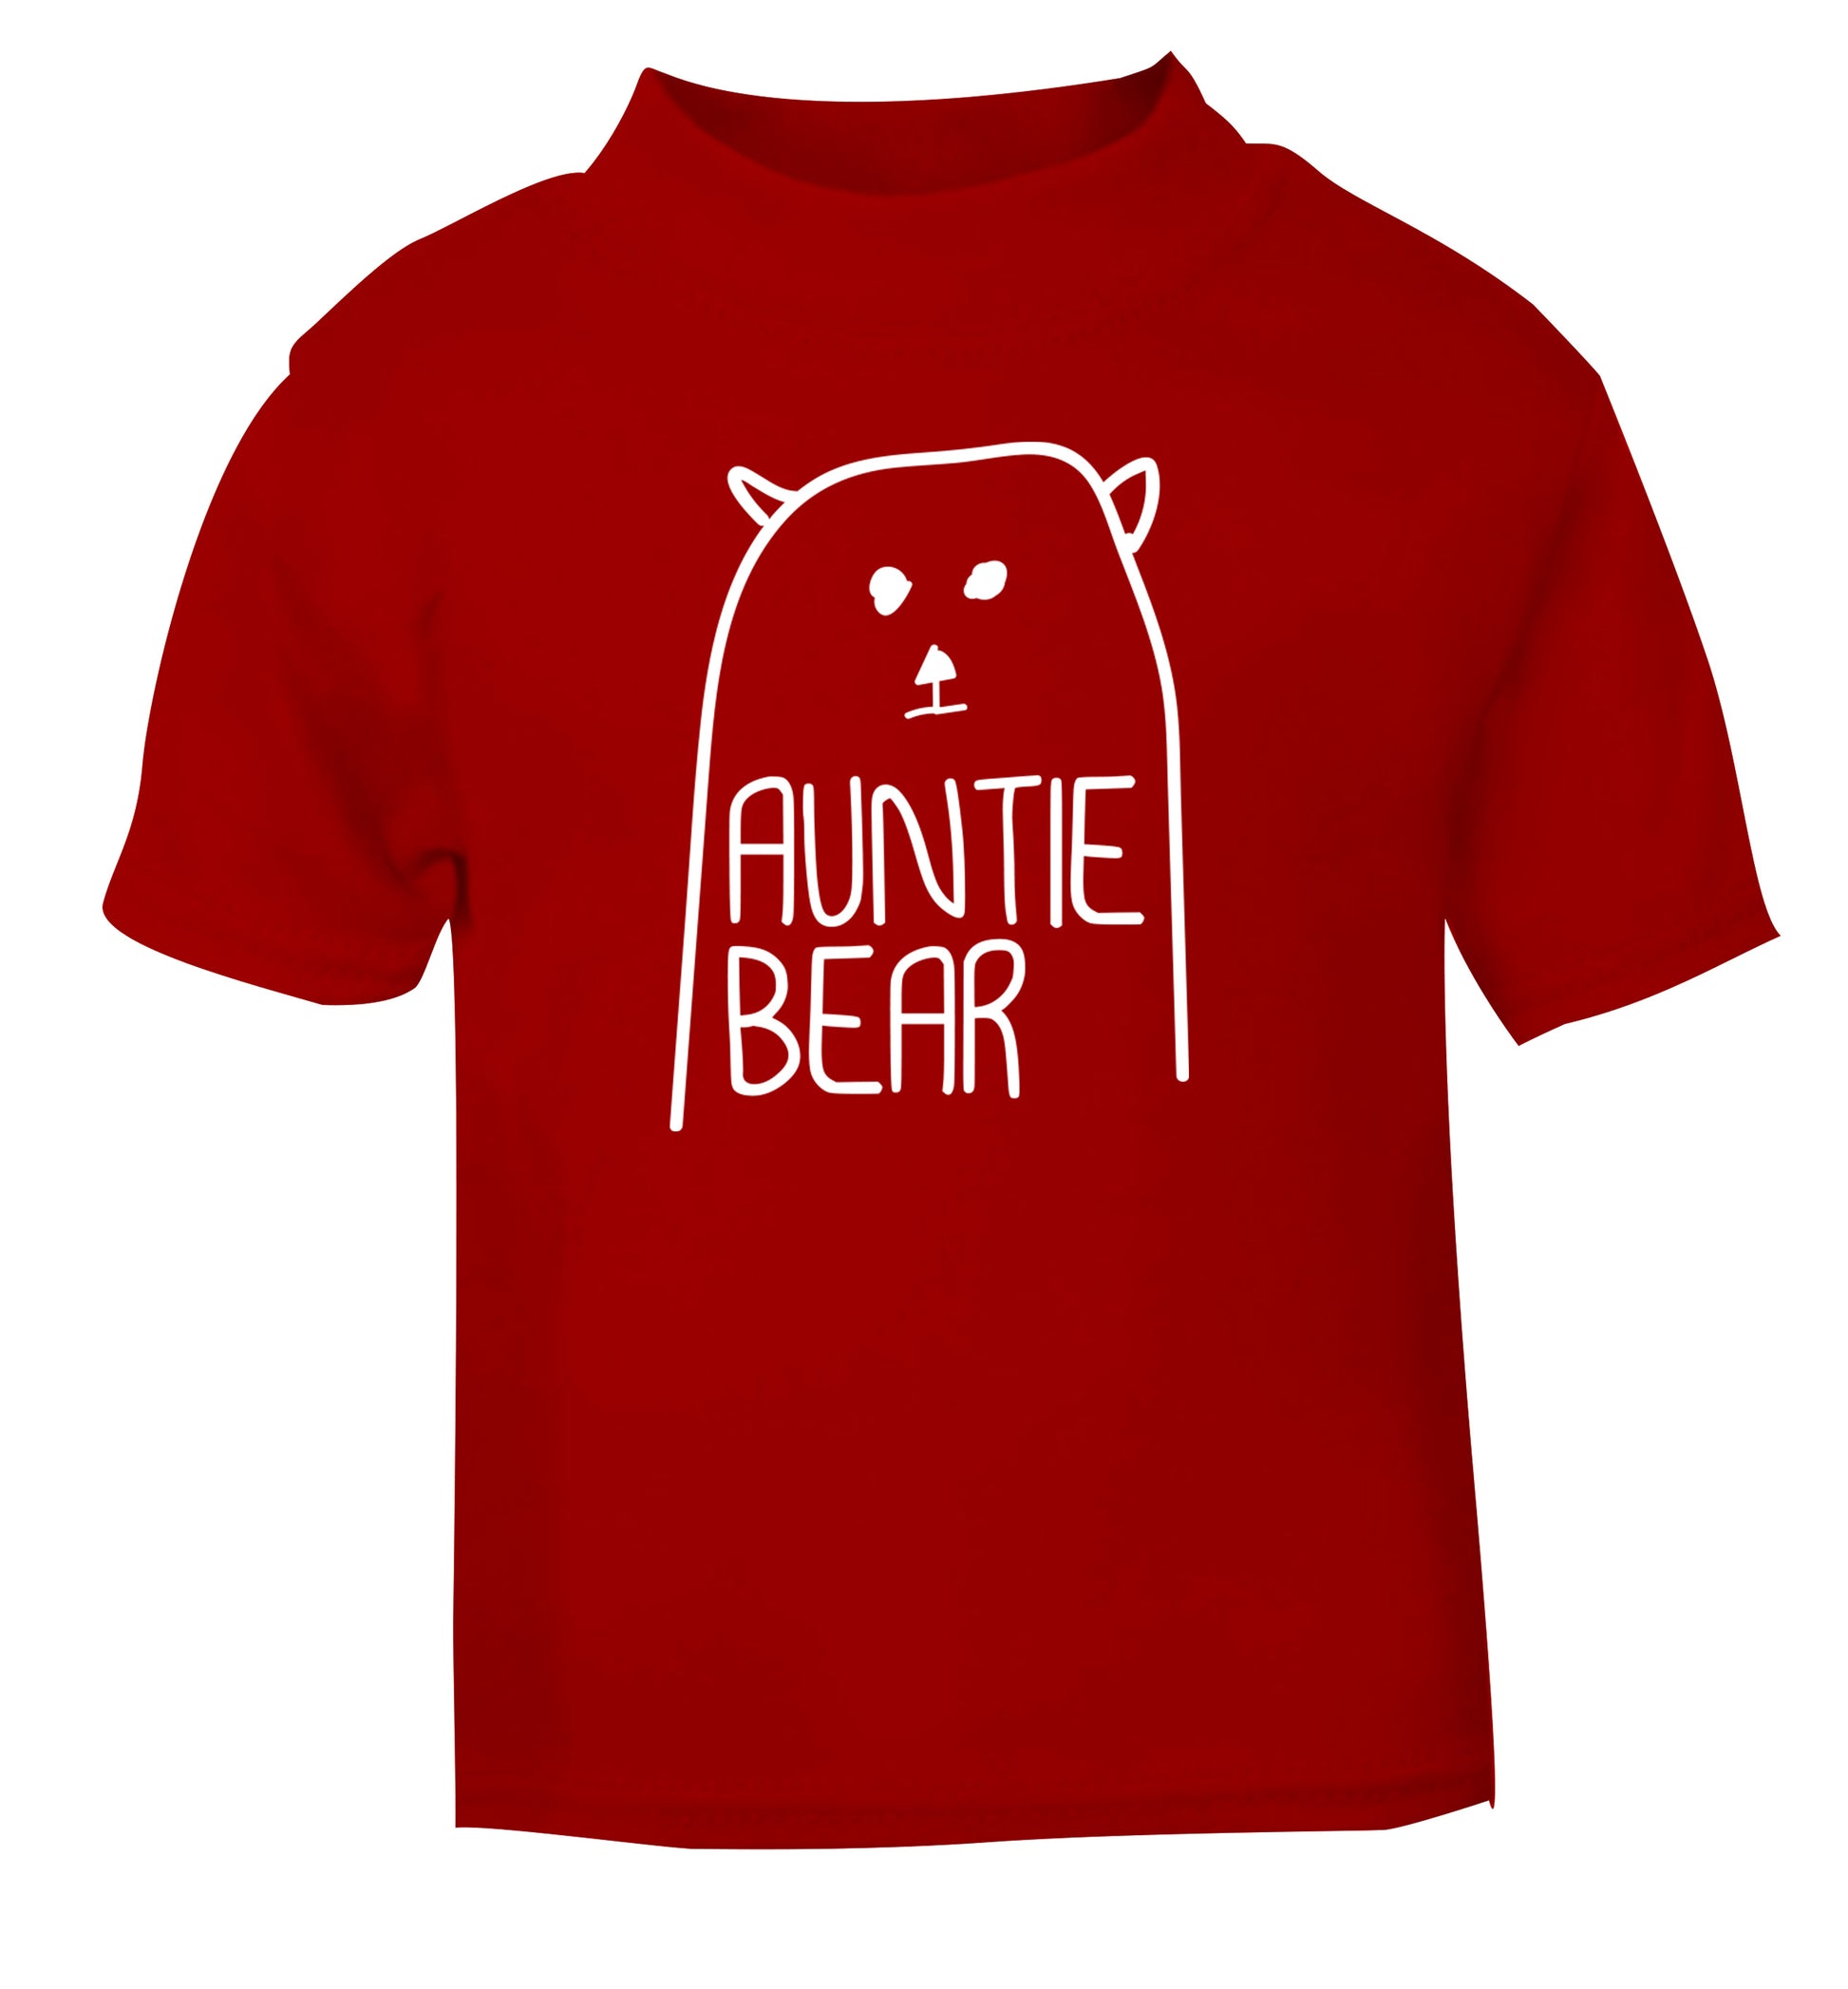 Auntie bear red Baby Toddler Tshirt 2 Years